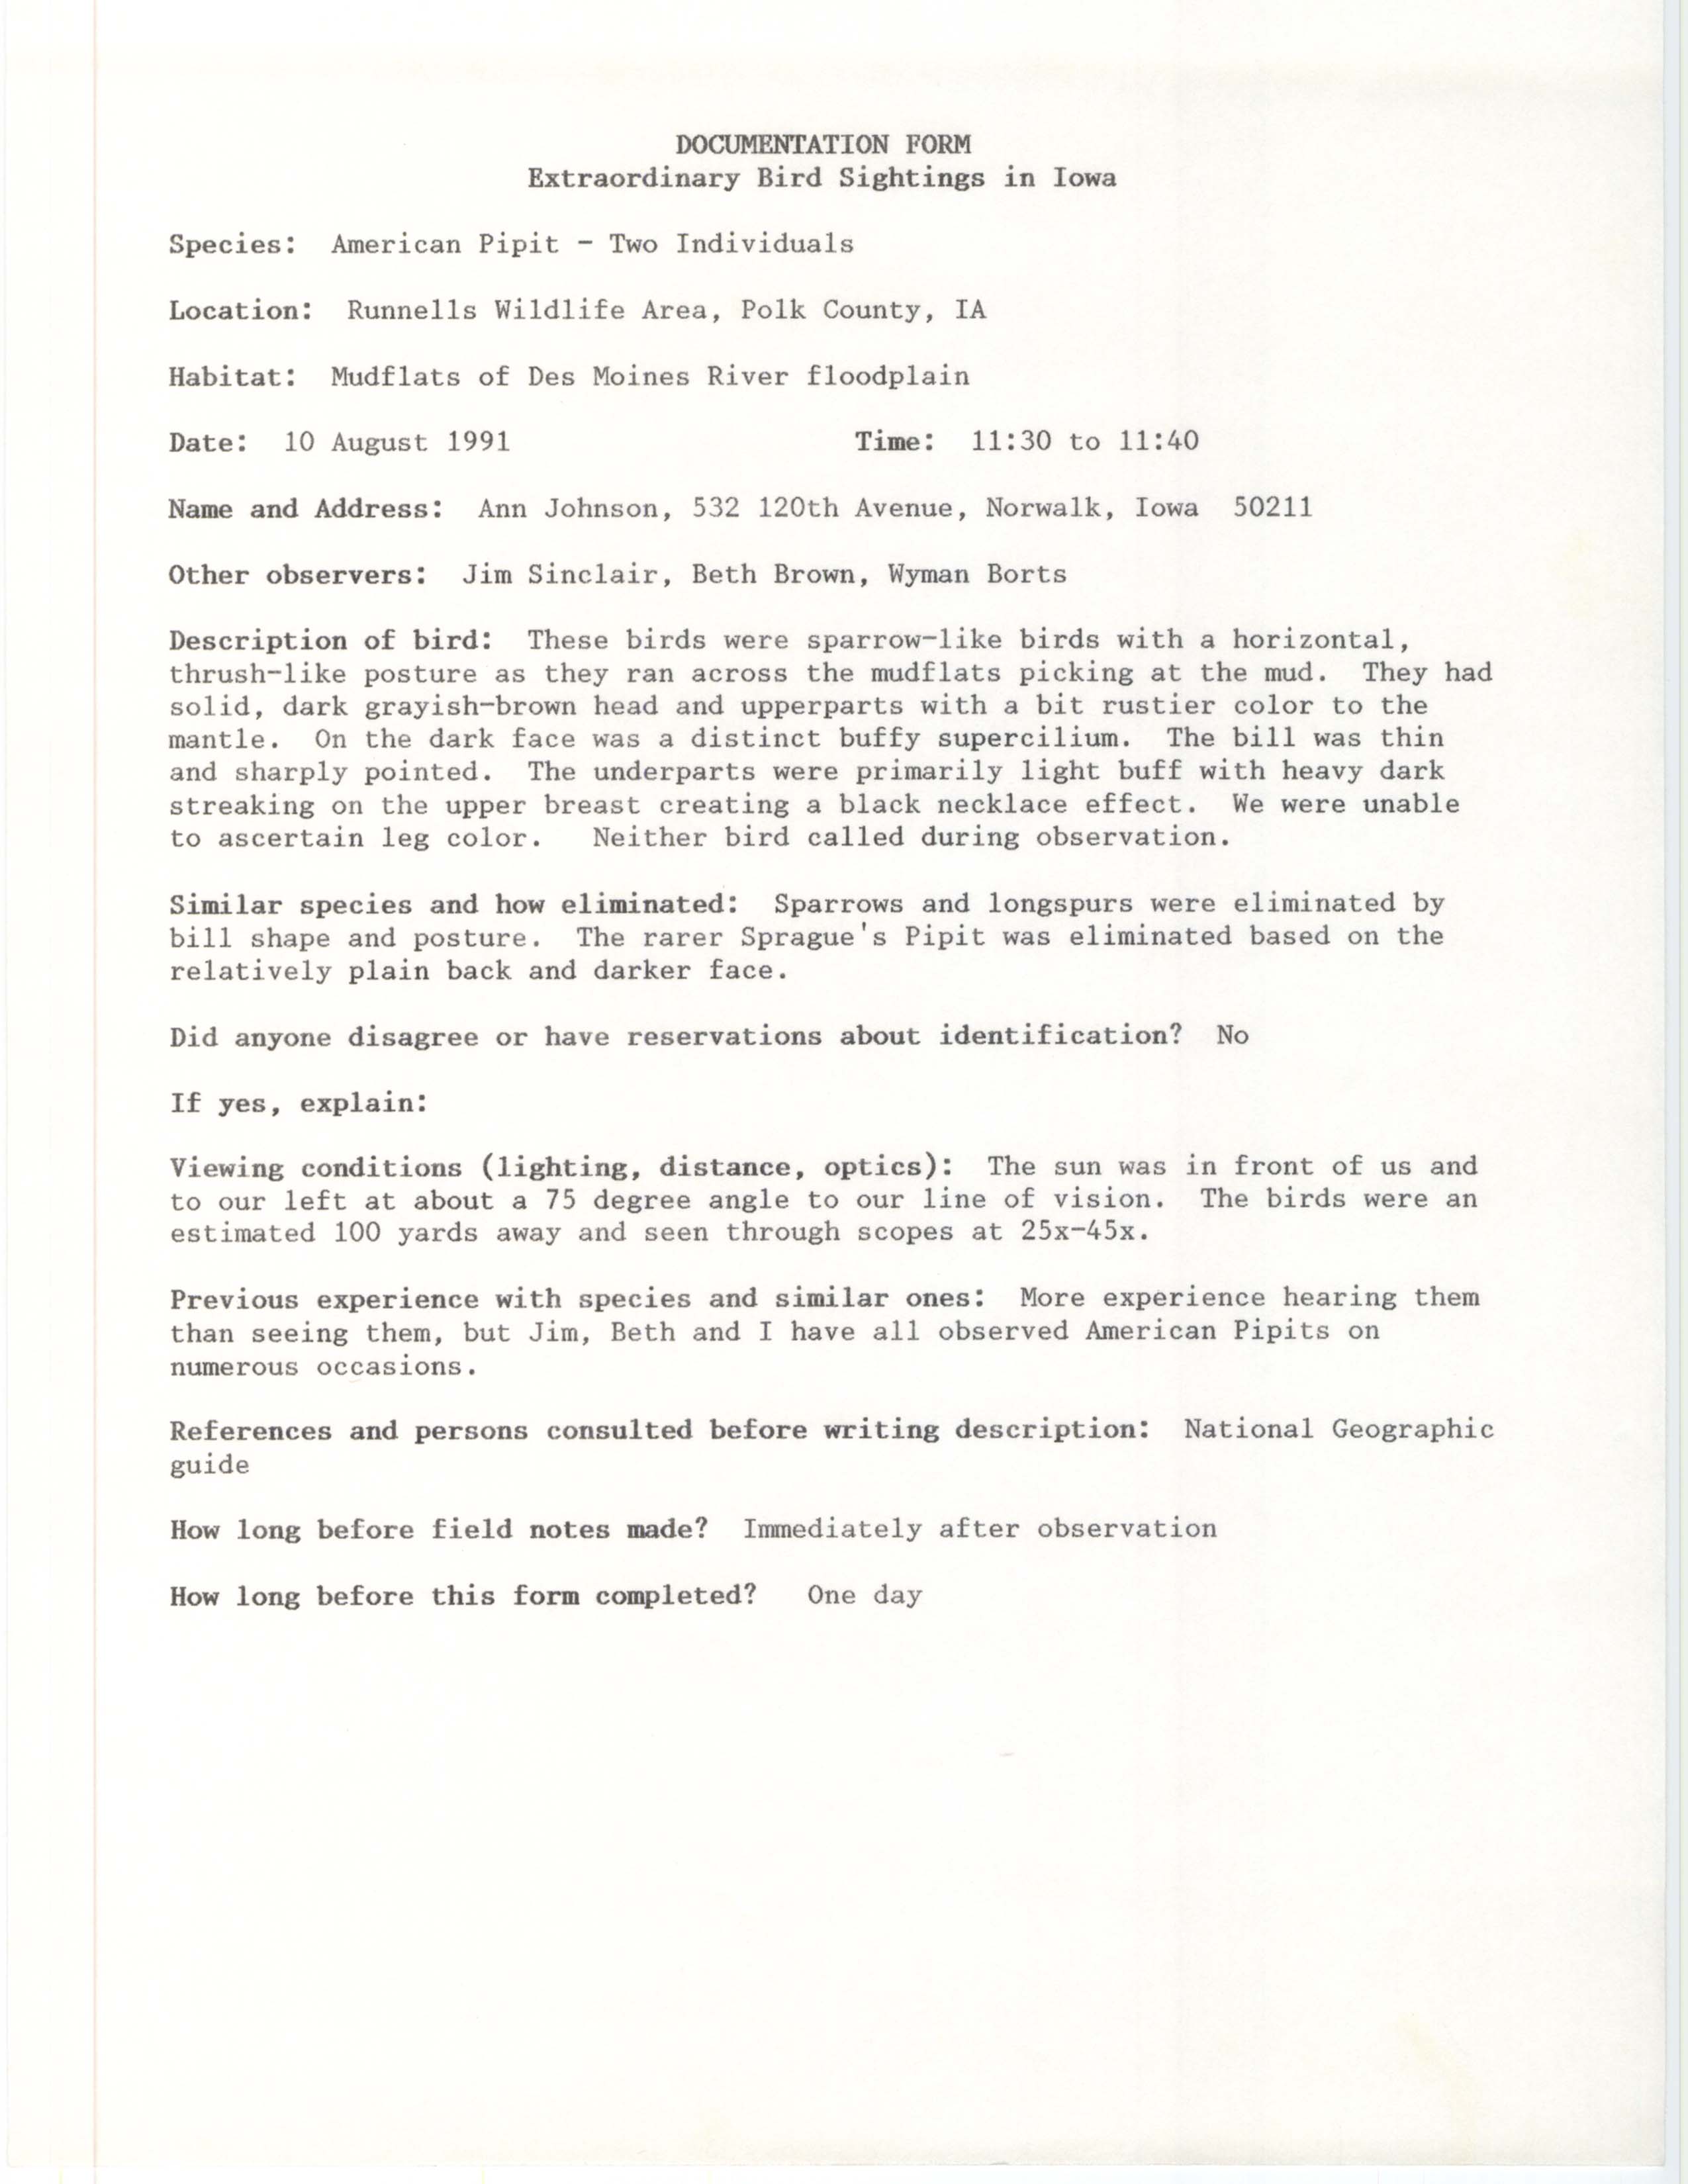 Rare bird documentation form for American Pipit at Runnells Wildlife Area, 1991